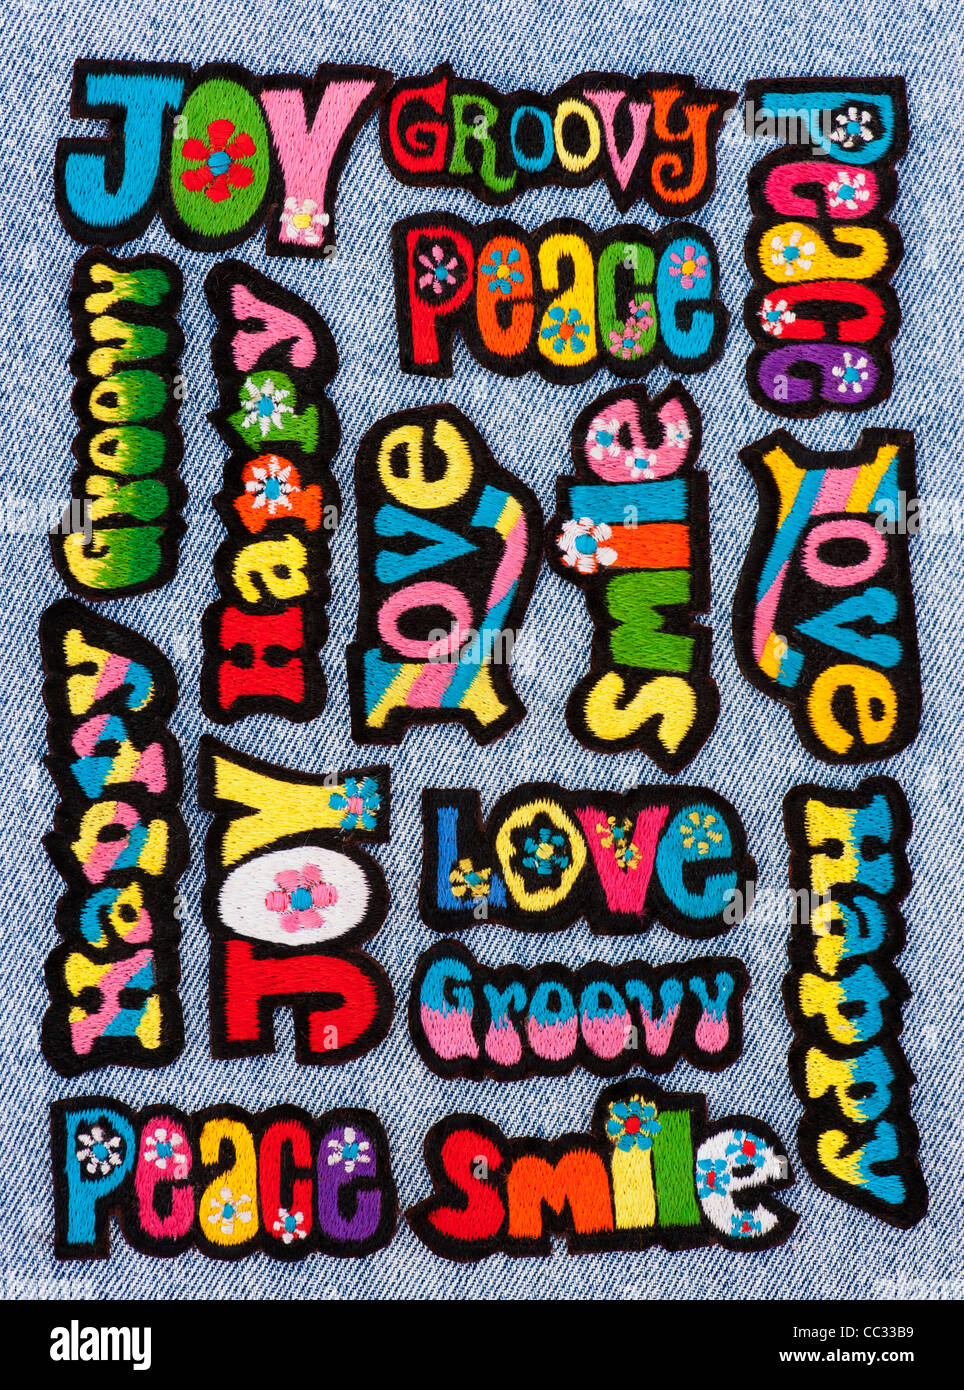 Embroidery iron on patches of Multicoloured Love, Peace, Happy, Smile, Joy and Groovy words on a denim jean background Stock Photo